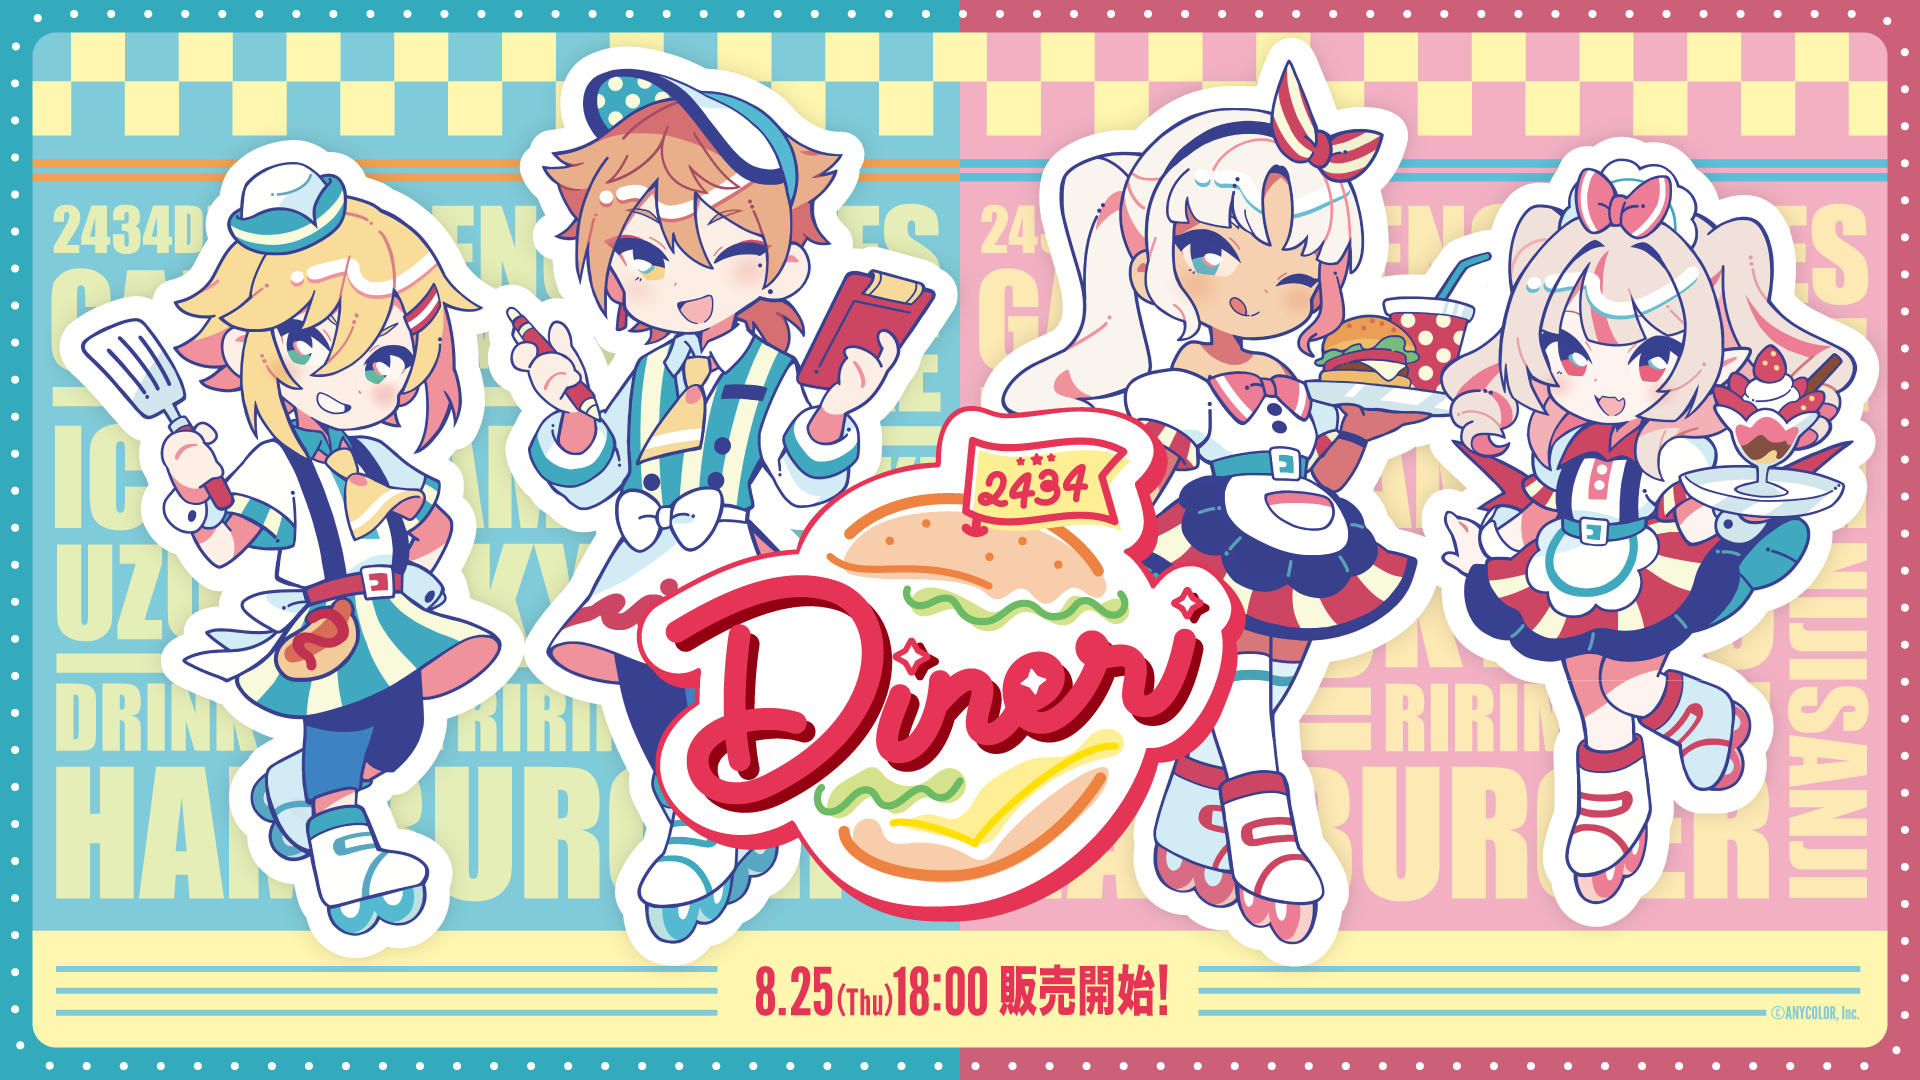 2434DINER」グッズ2022年8月25日(木)18時より販売決定！ | ANYCOLOR 